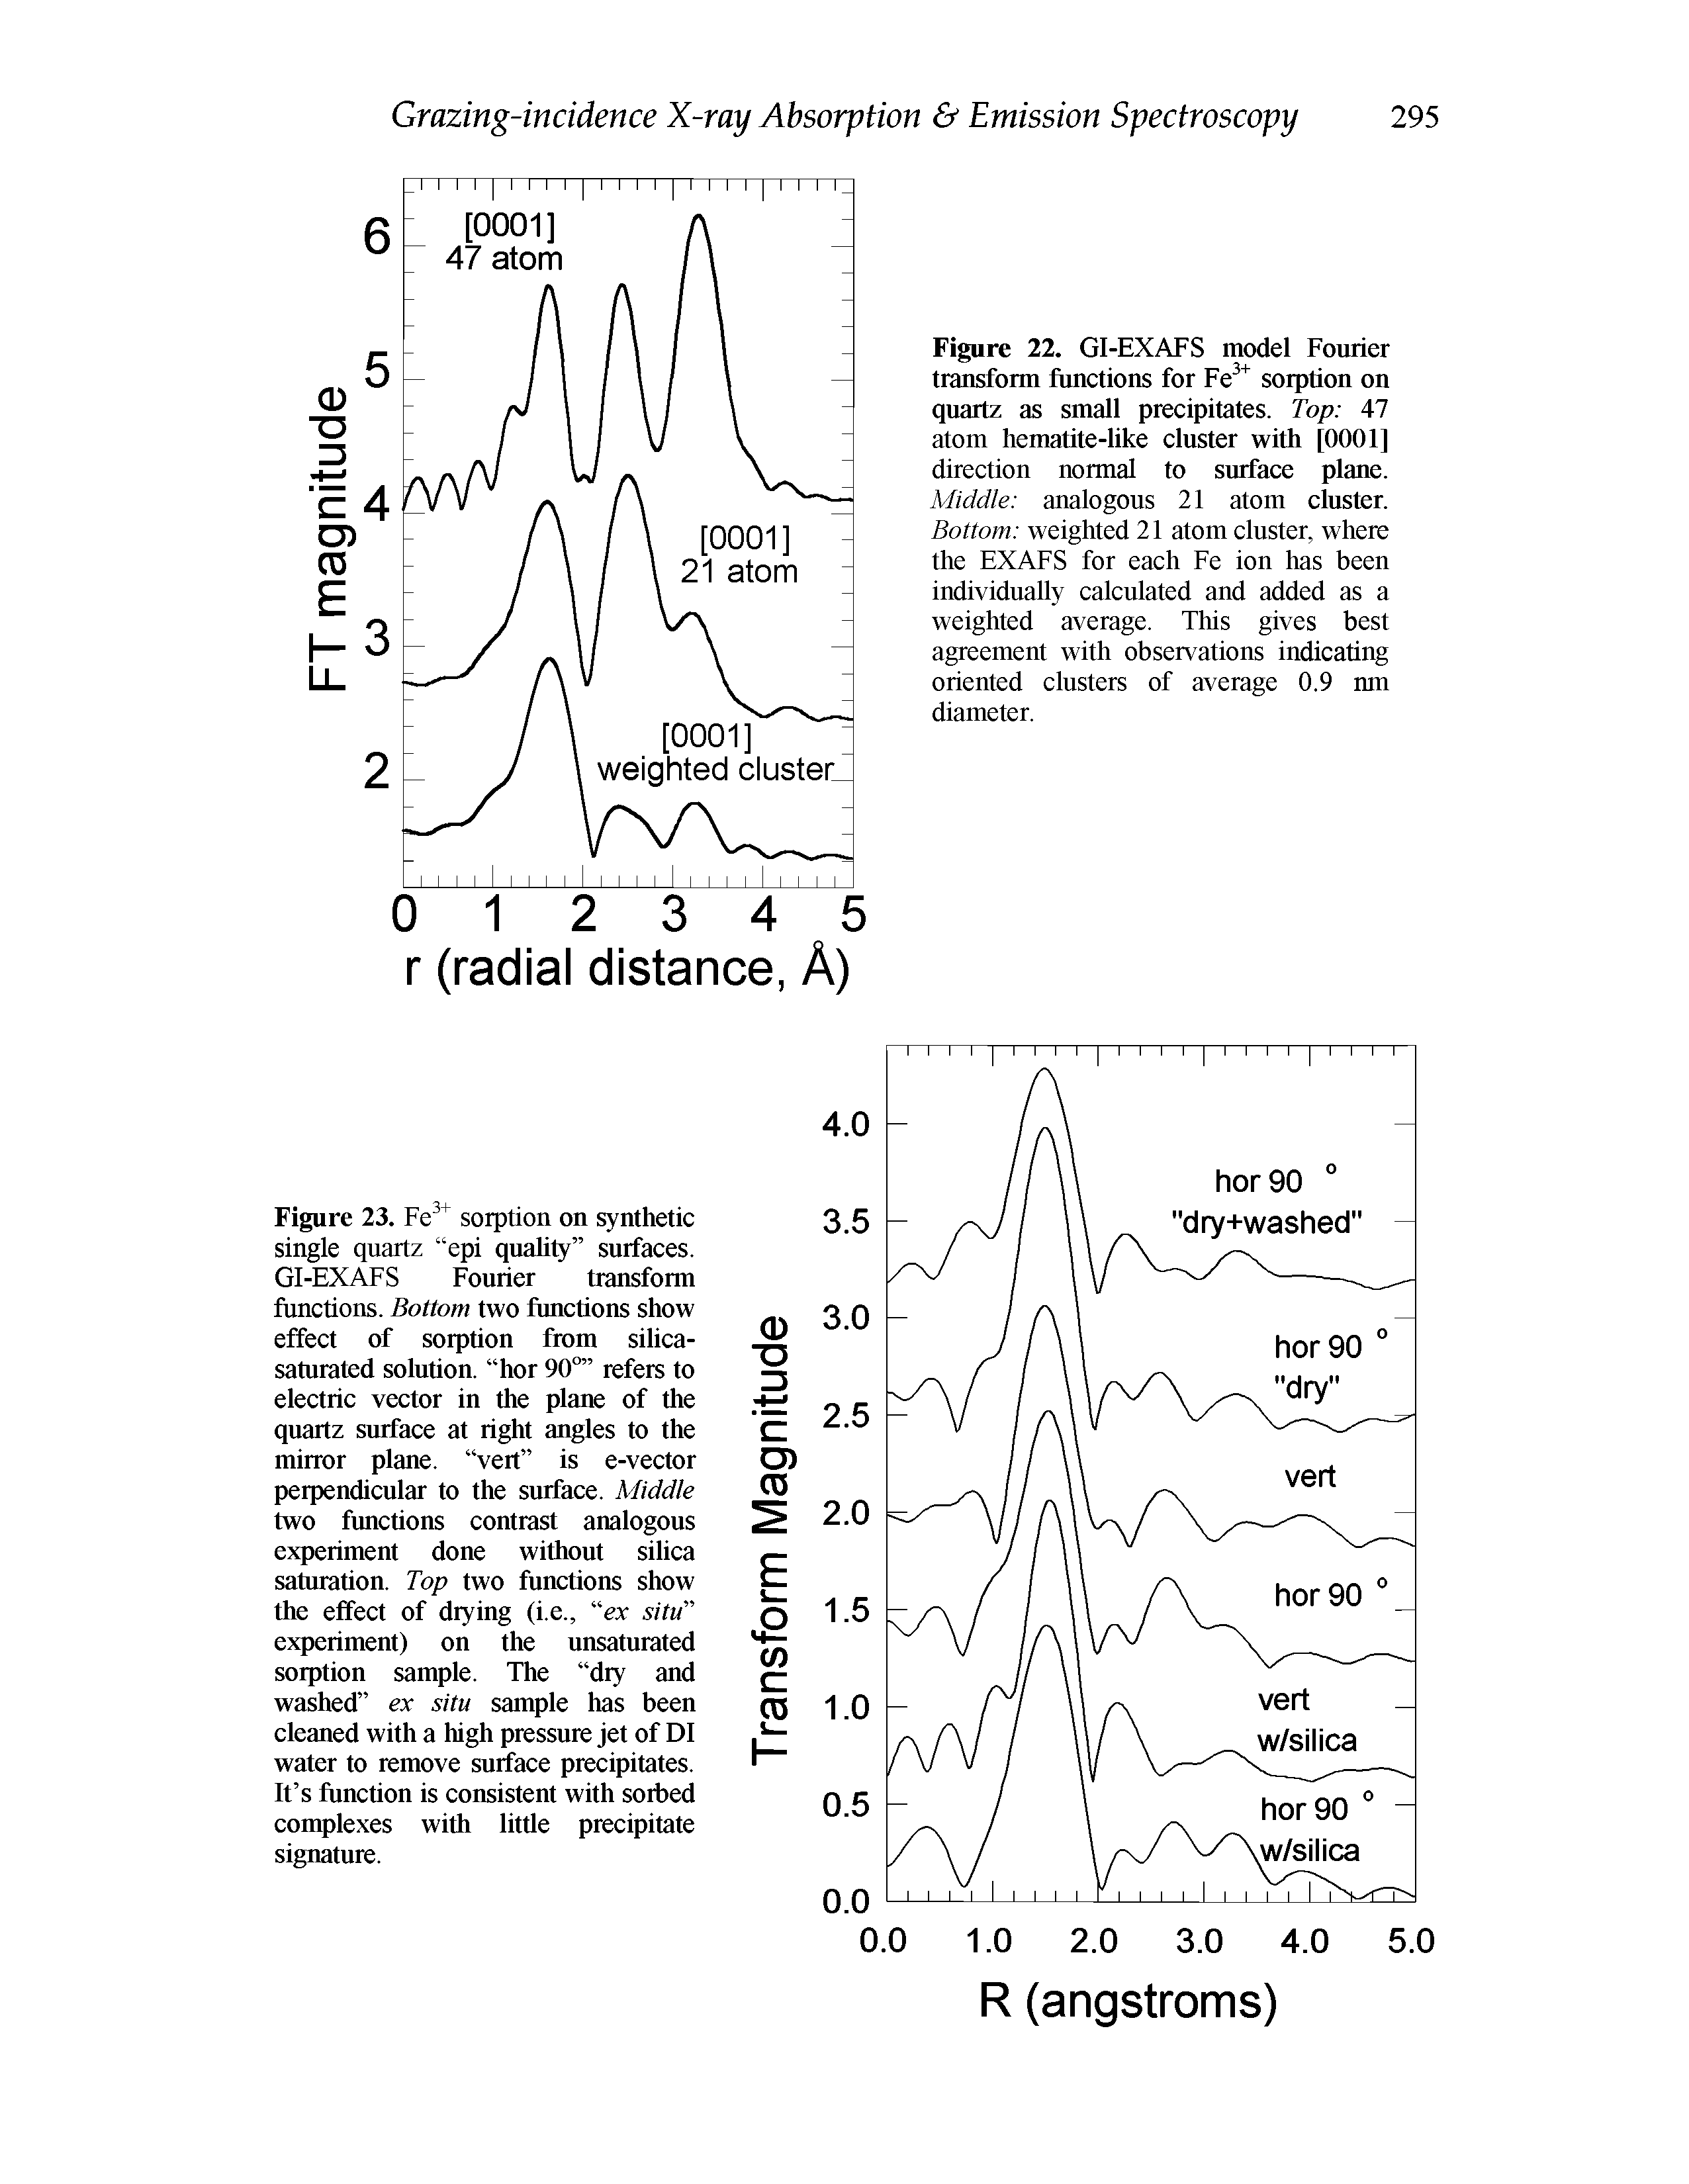 Figure 22. GI-EXAFS model Fourier transform functions for Fe3+ sorption on quartz as small precipitates. Top 47 atom hematite-like cluster with [0001] direction normal to surface plane. Middle analogous 21 atom cluster. Bottom weighted 21 atom cluster, where the EXAFS for each Fe ion has been individually calculated and added as a weighted average. This gives best agreement with observations indicating oriented clusters of average 0.9 nm diameter.